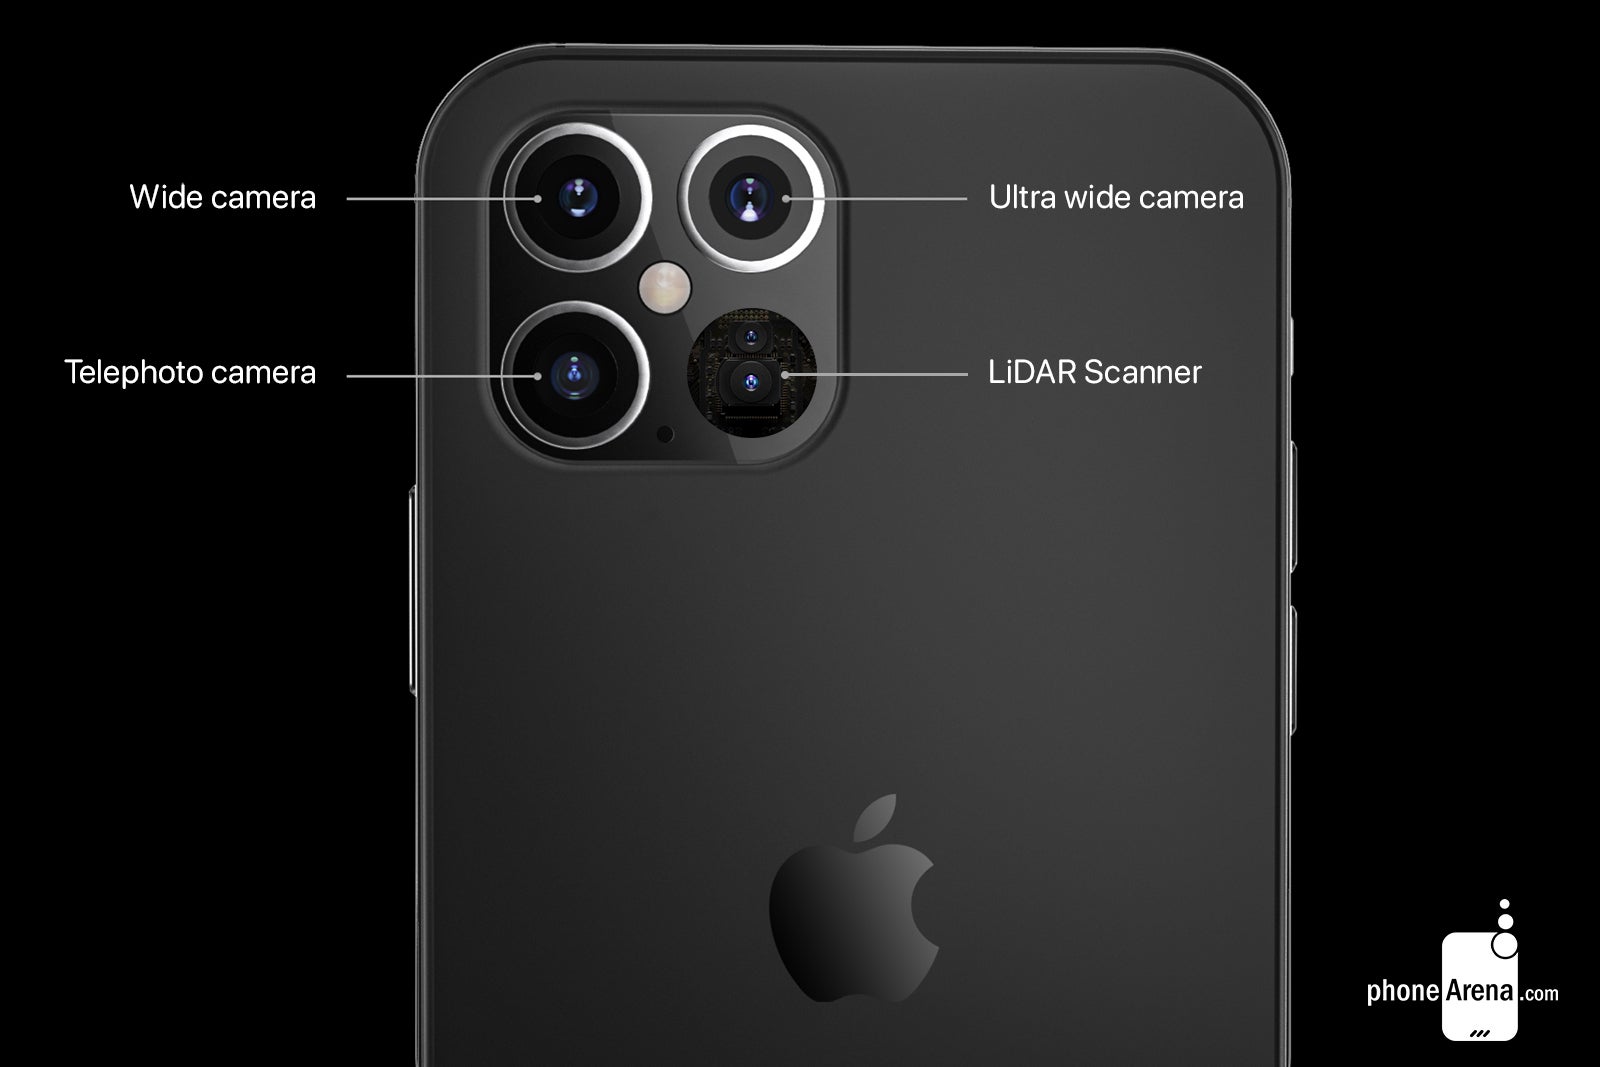 Render shows the rear cameras expected on the iPhone 12 Pro models - OLED panel supplier for 5G iPhone 12 models fails quality tests